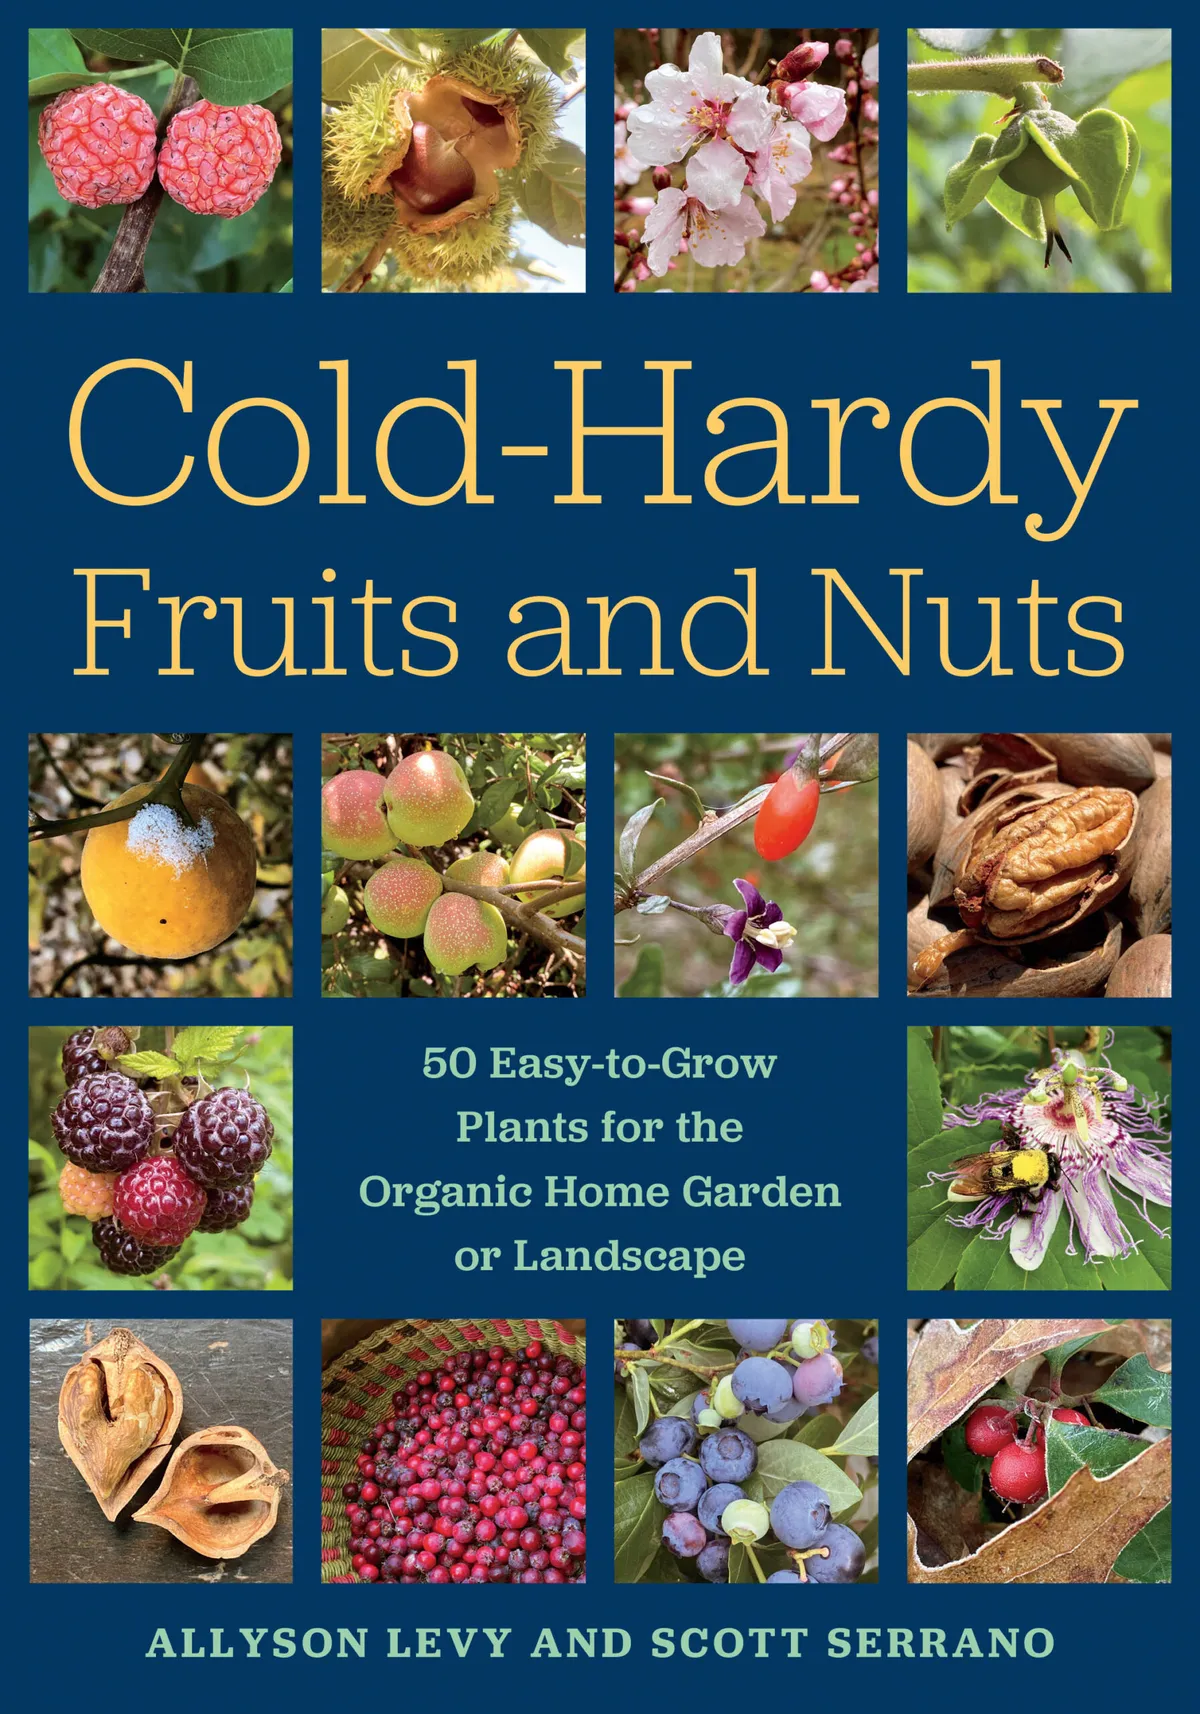 Cold Hardy Fruit and Nuts by Allyson Levy and Scott Serrano